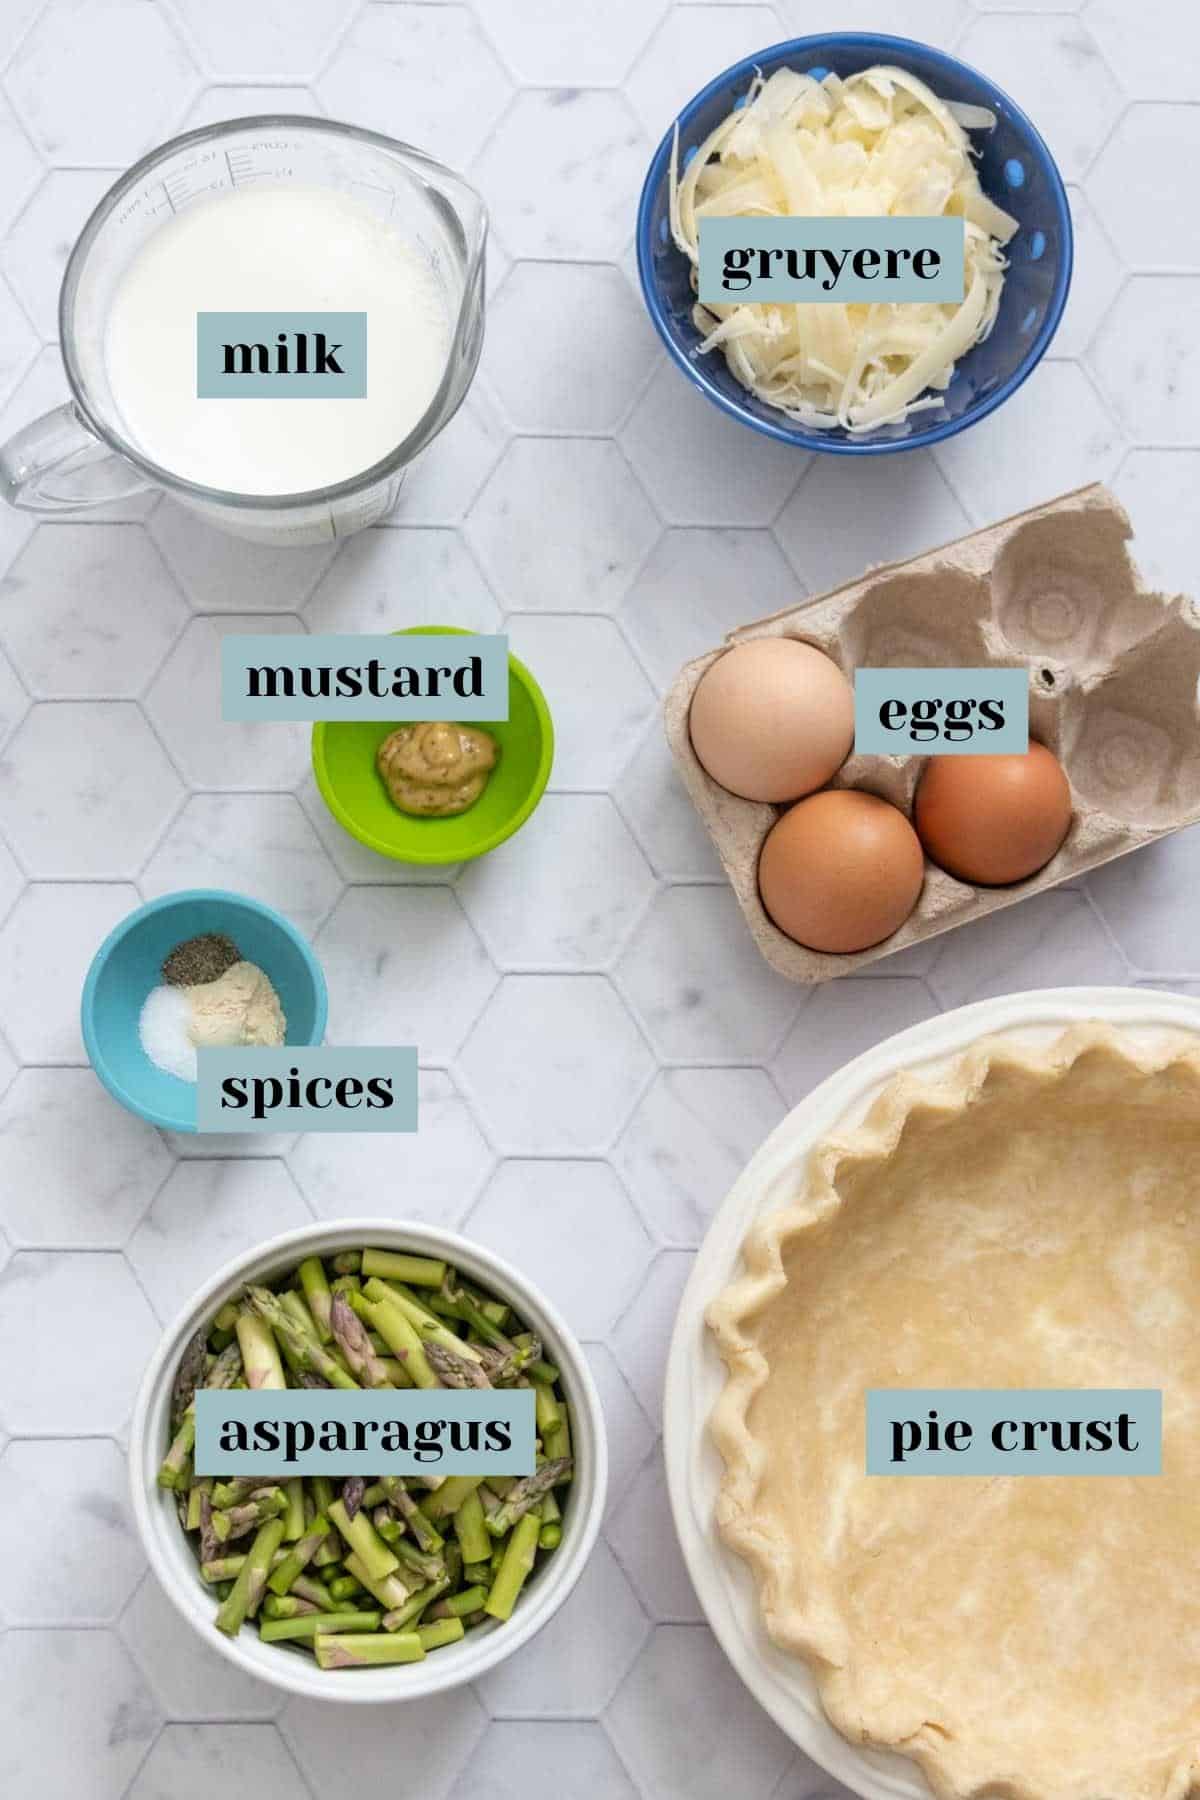 Ingredients for asparagus quiche on a tile surface with labels.